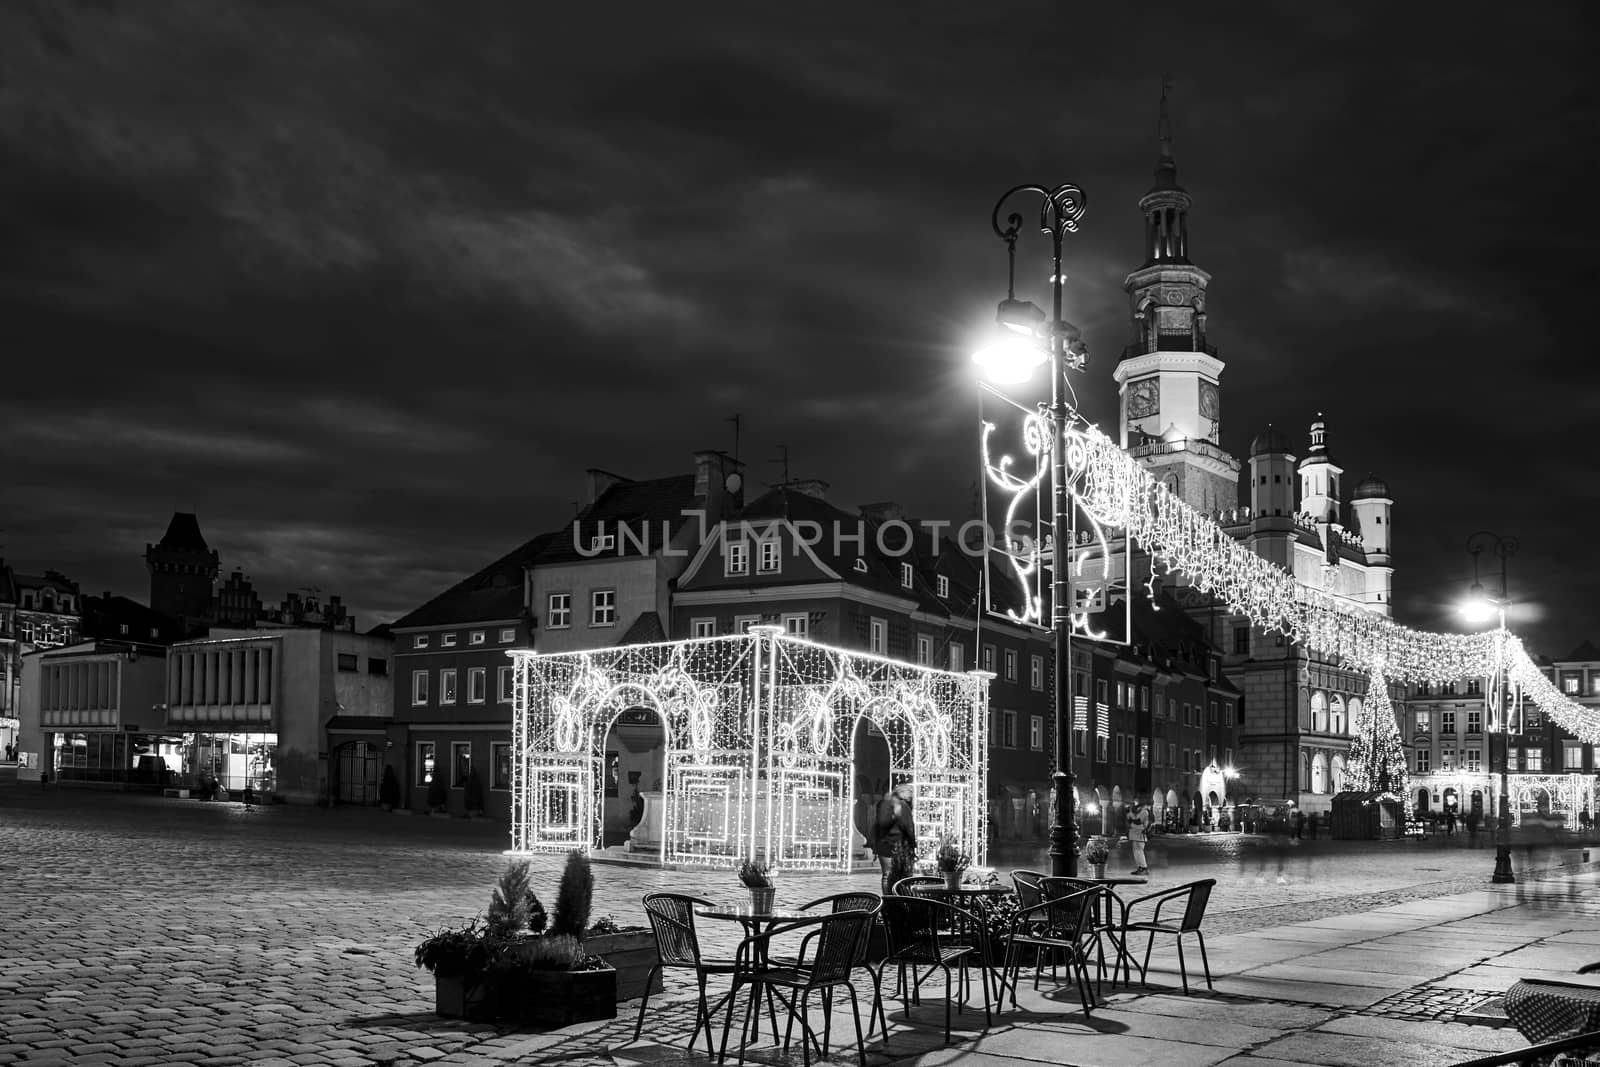 historic tenement houses and the renaissance town hall with Christmas decorations on the market square at night in Poznan, monochrome